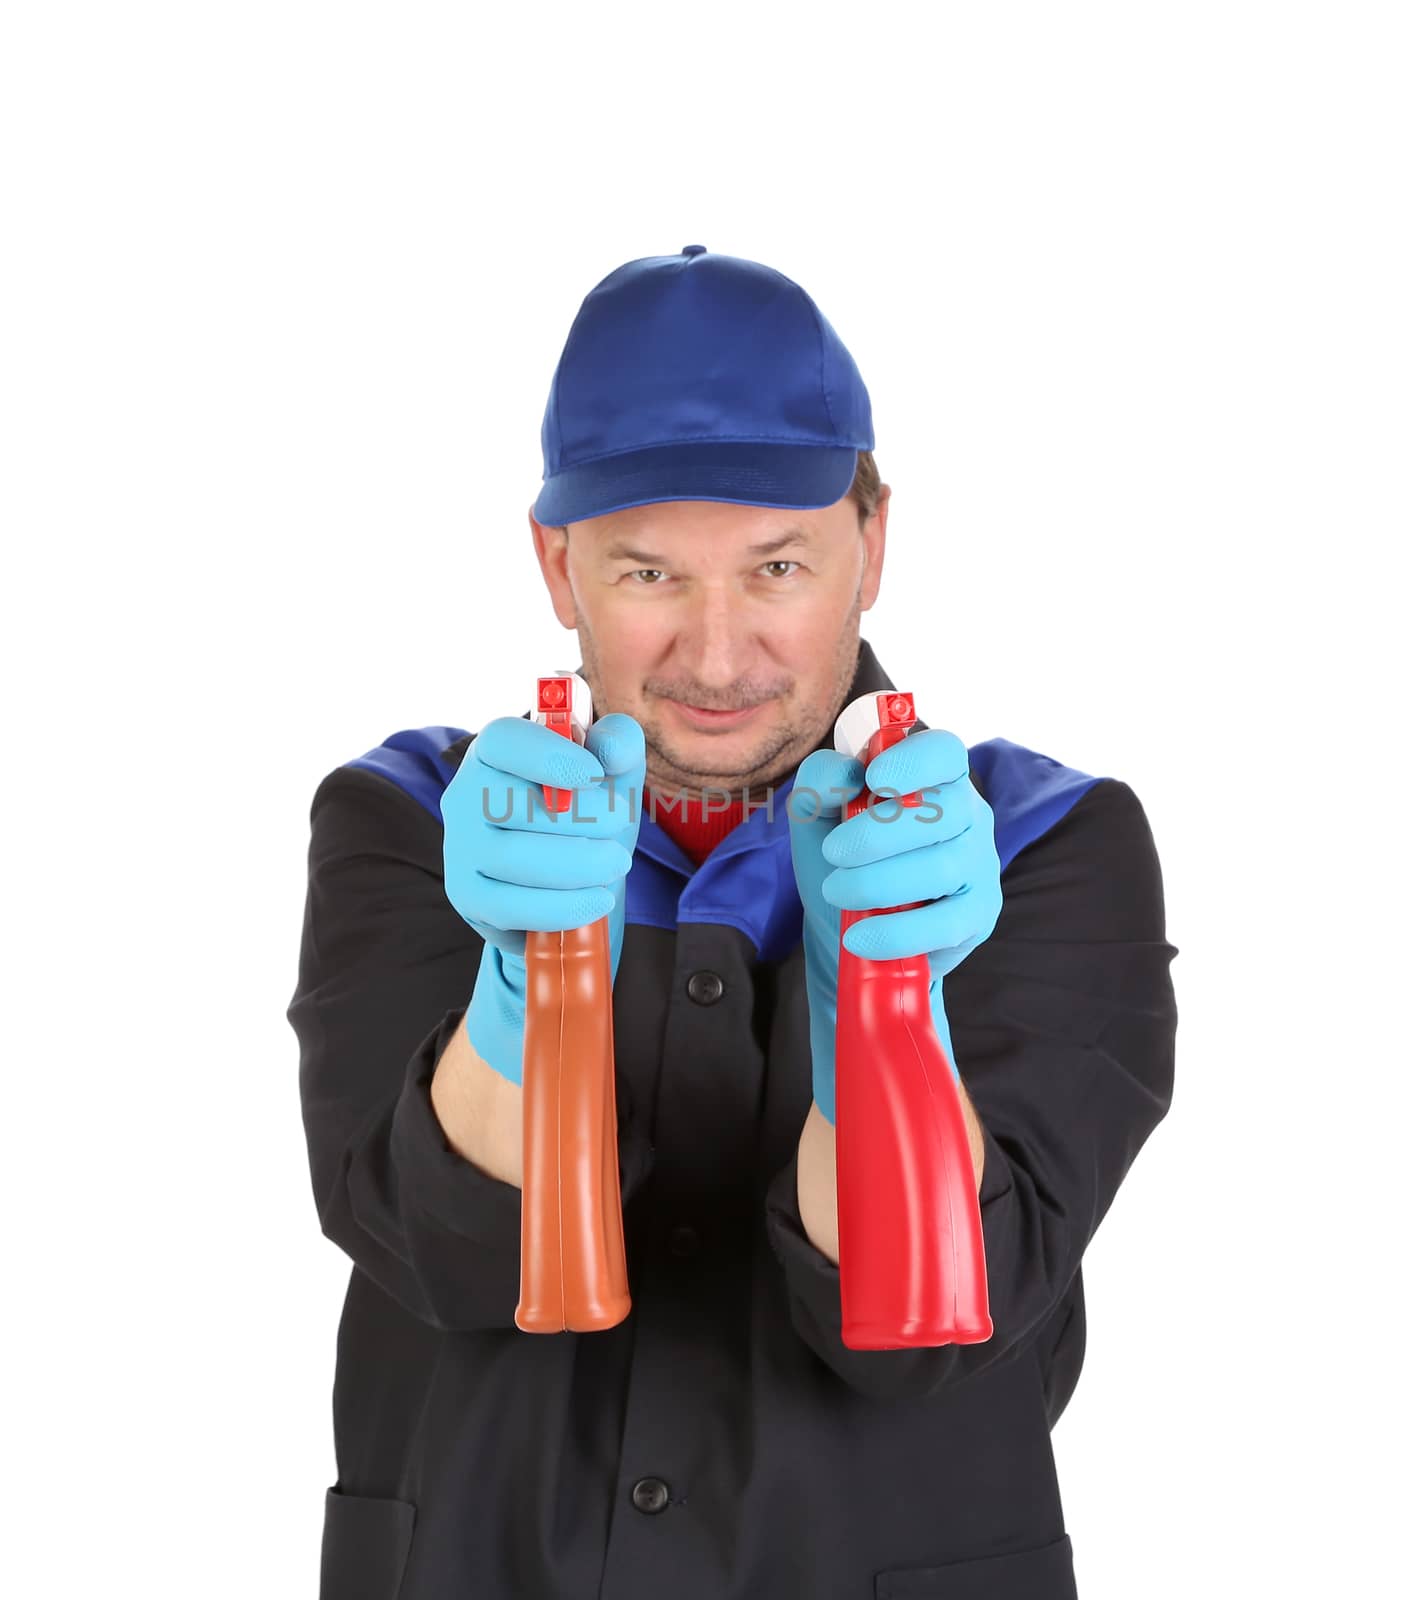 Man holds spray botlles as gun. Isolated on a white background.